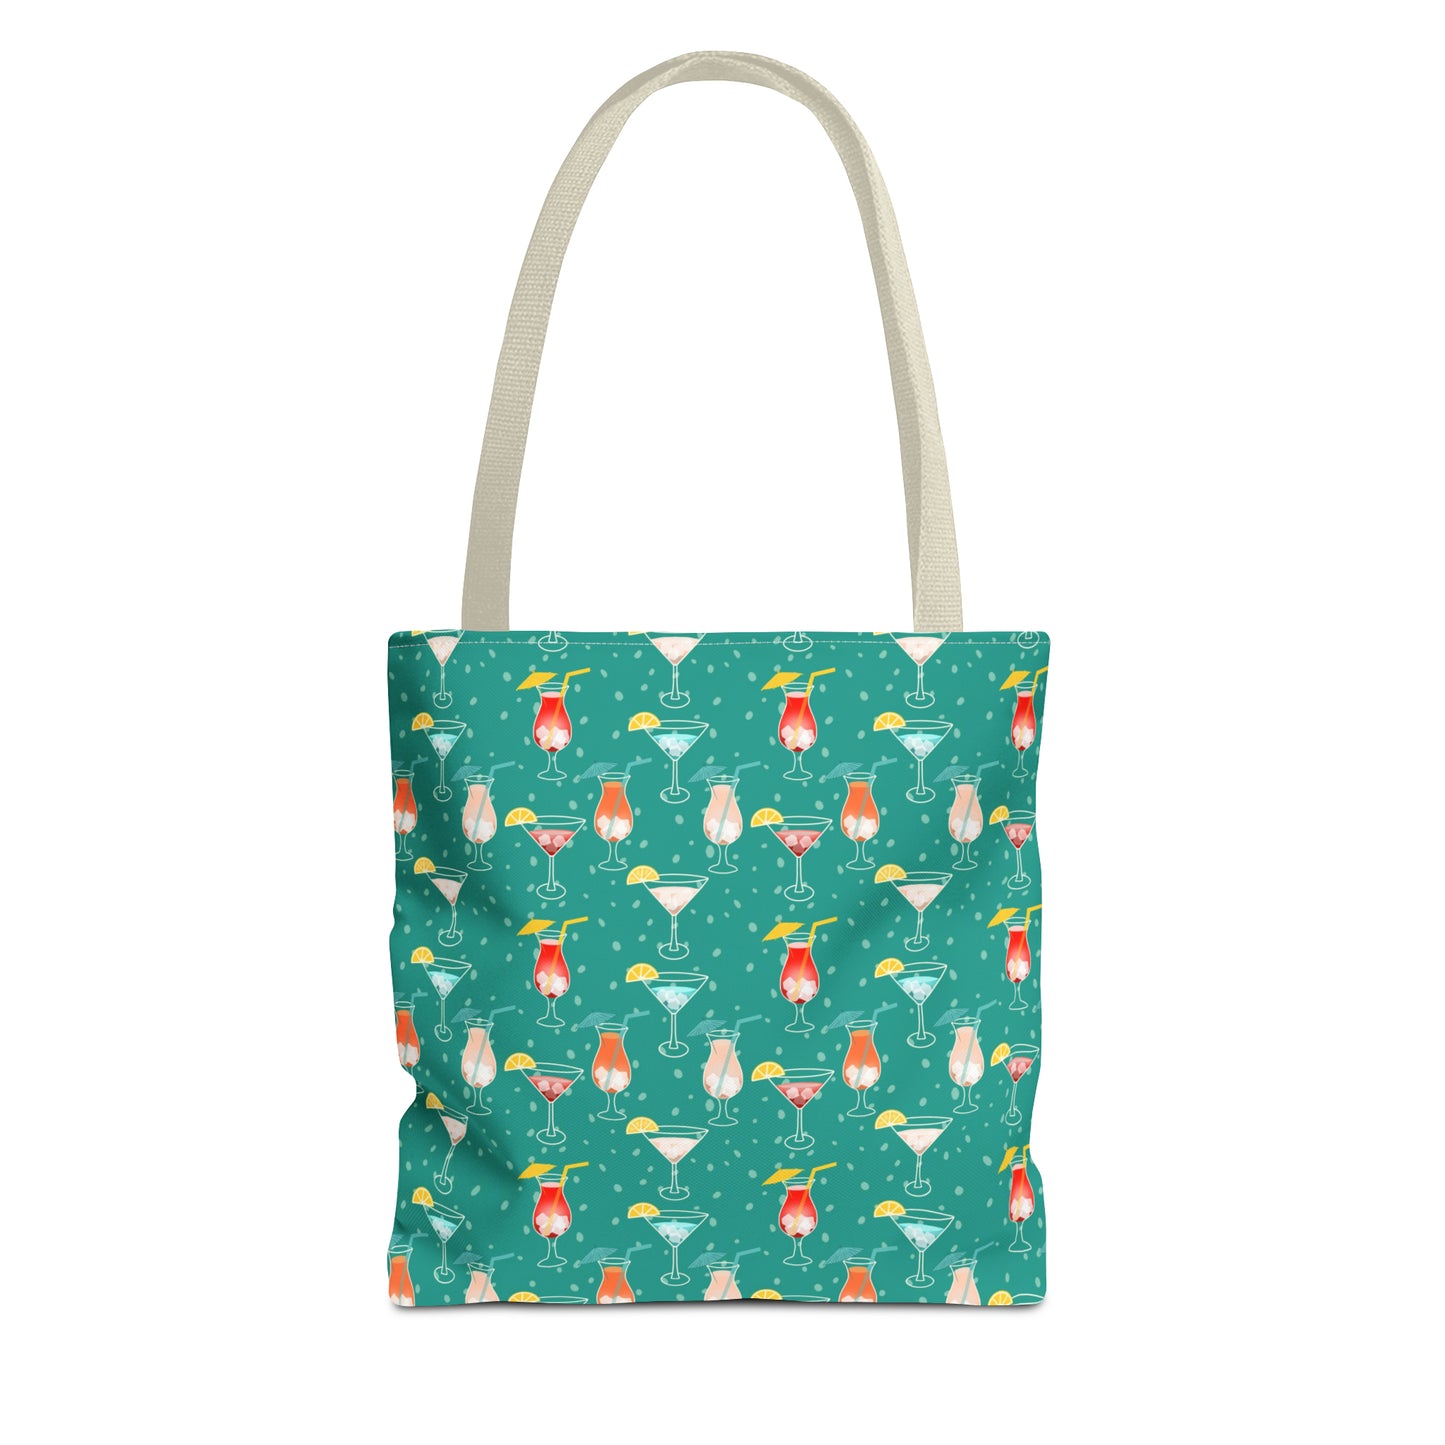 Cocktails Tote Bag: Vibrant Drinks with Lemon Slices, Umbrellas, and Straws on Turquoise Background